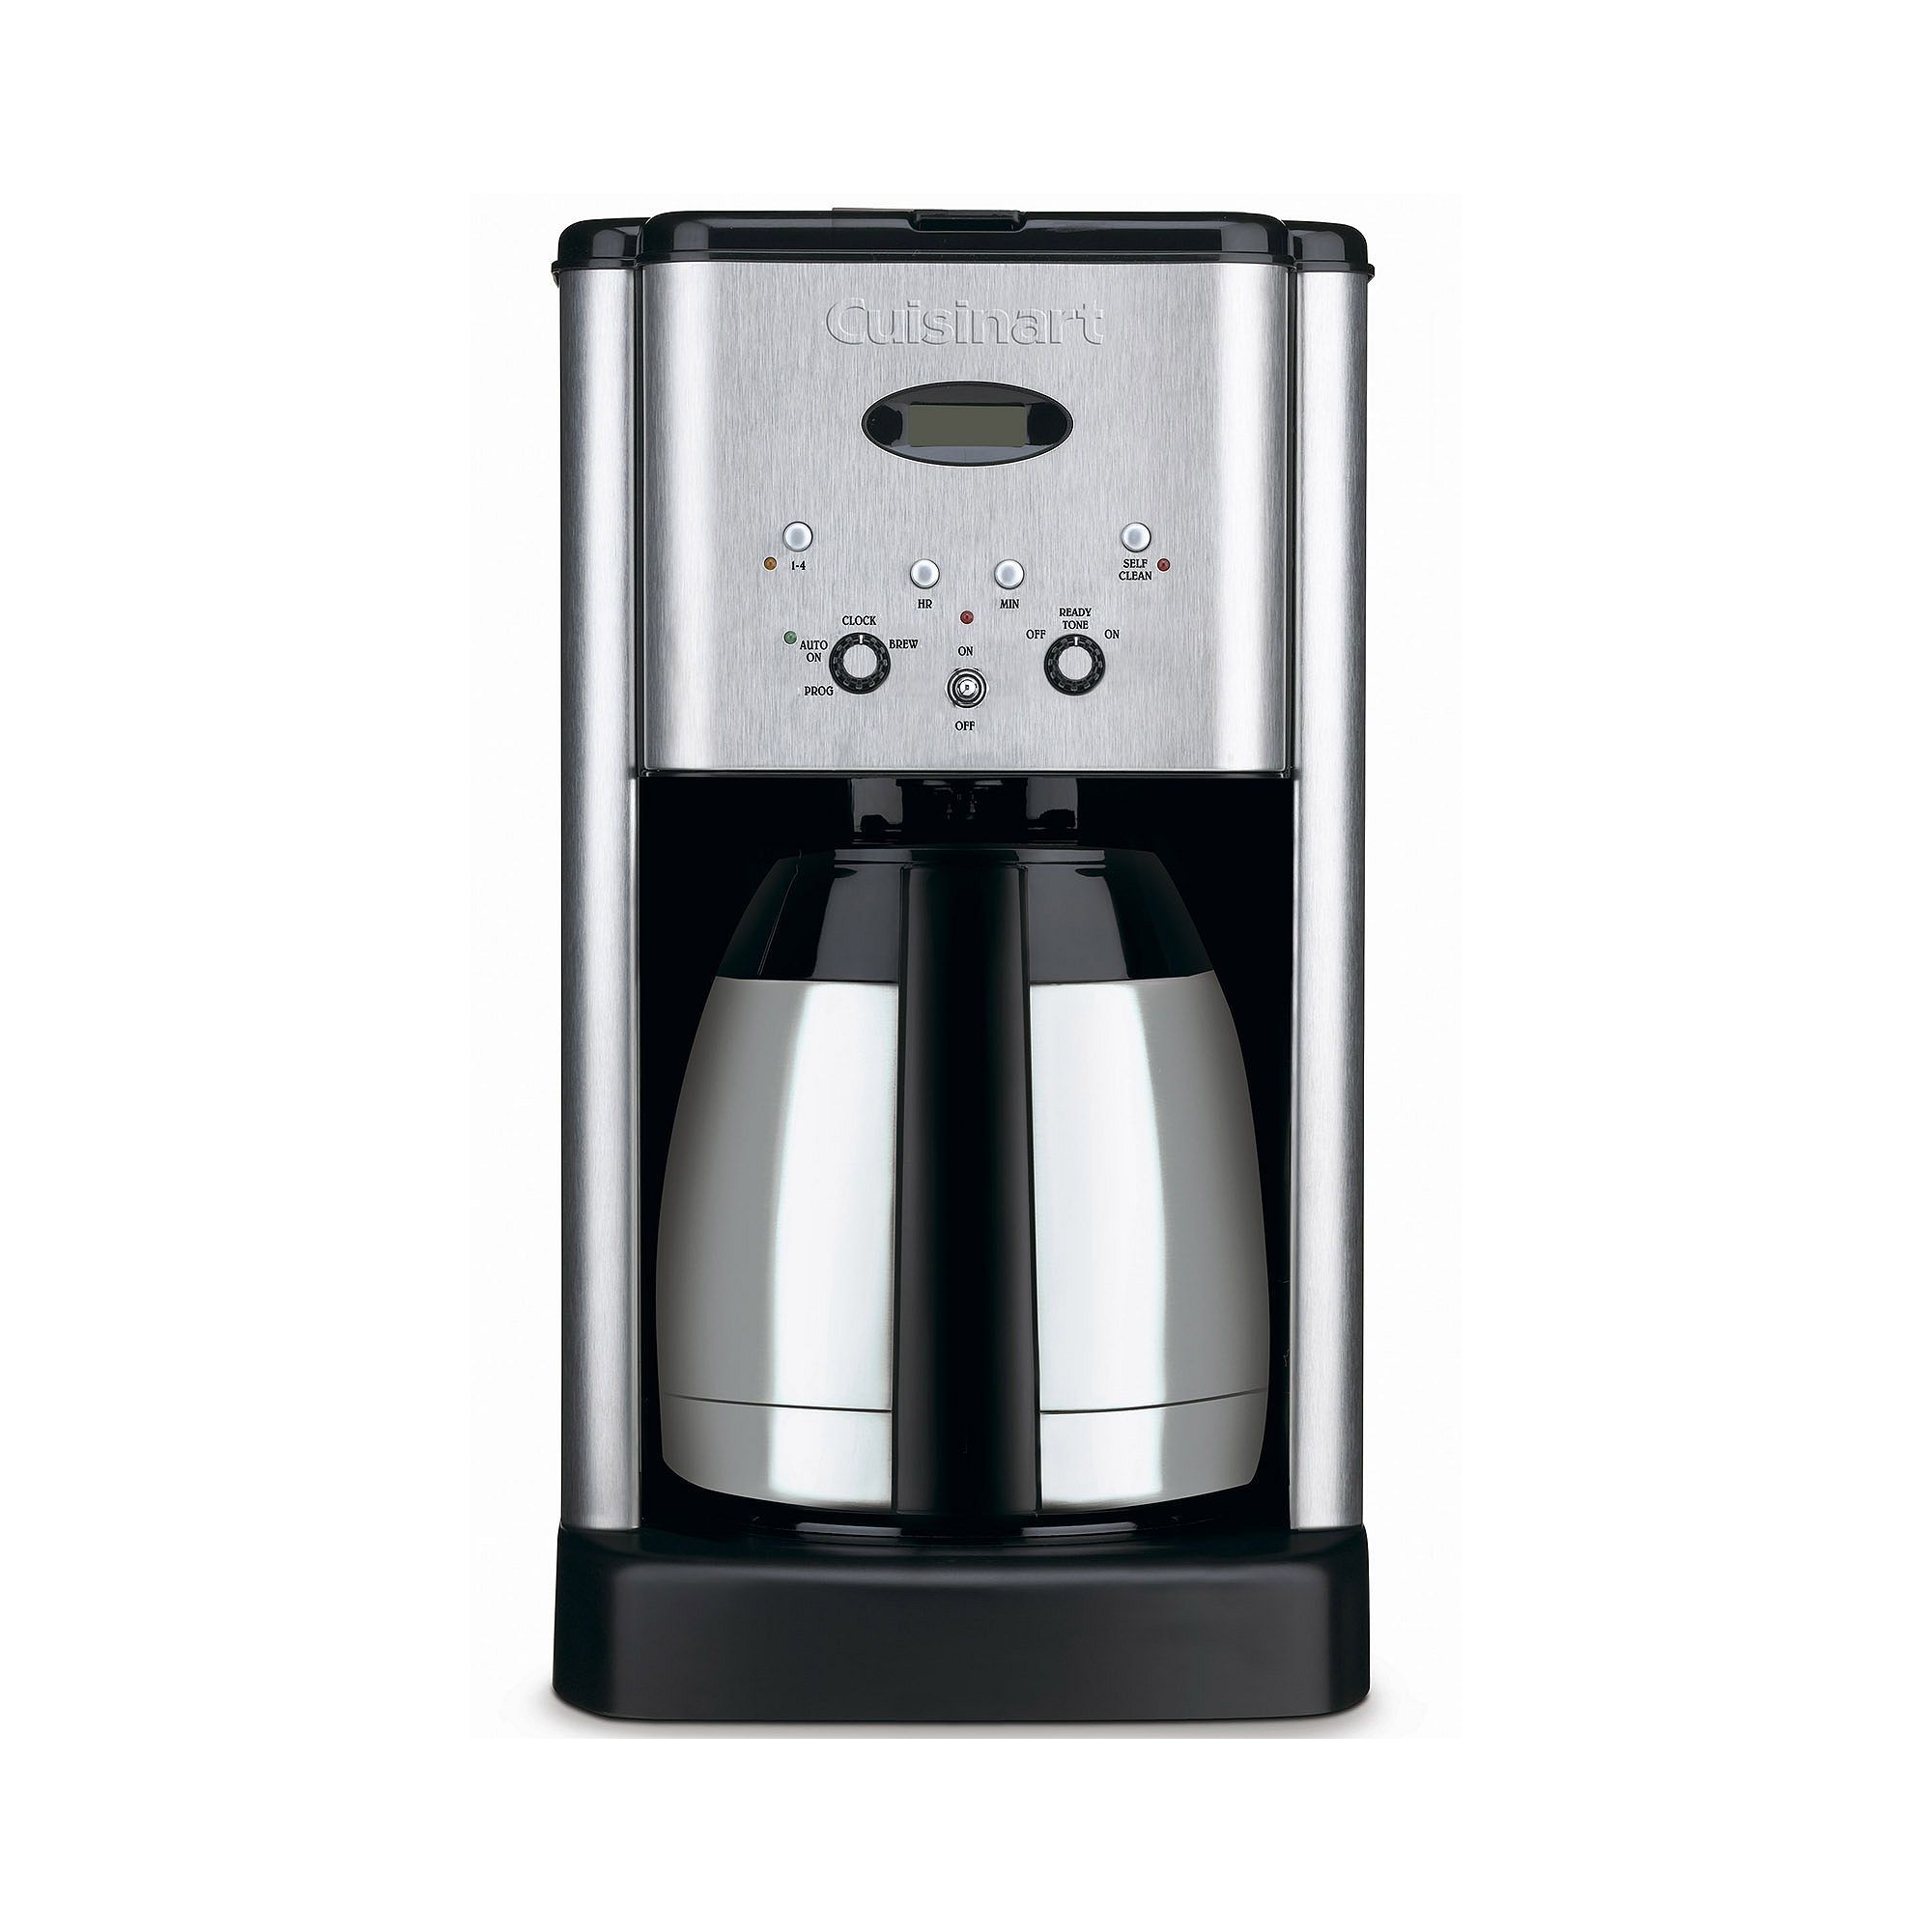 Cuisinart 10-Cup Thermal Coffee Maker | JCPenney